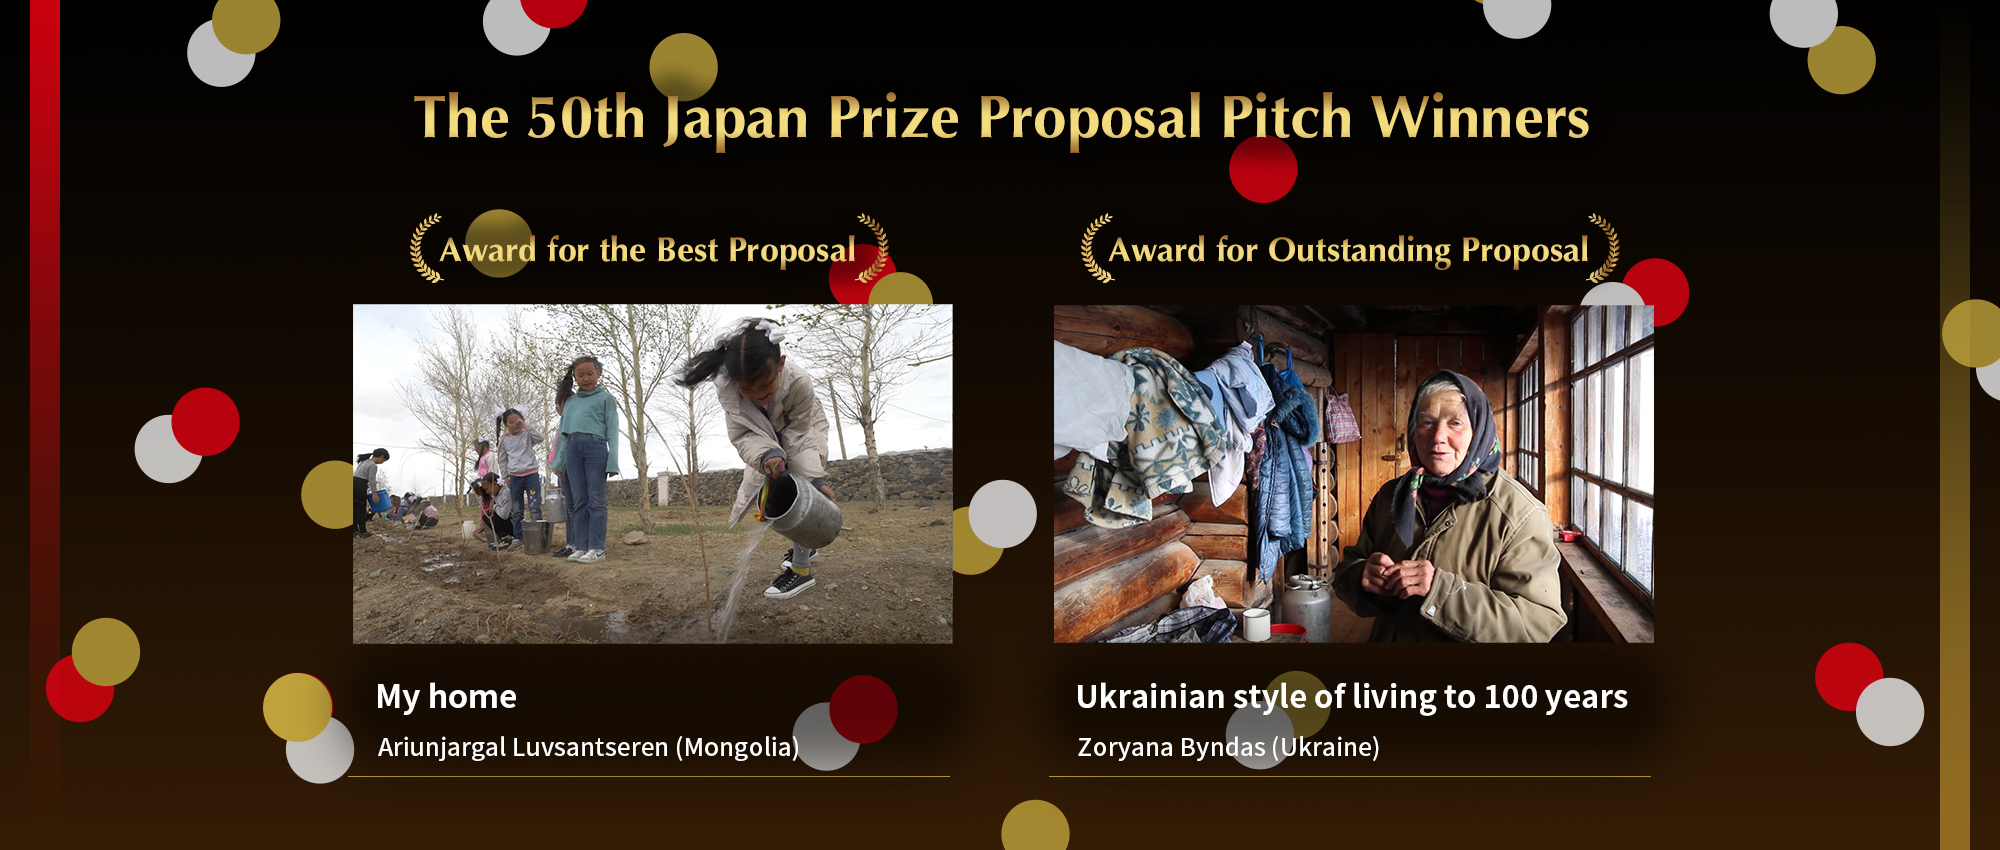 Here are the winners of the Proposal Pitch!